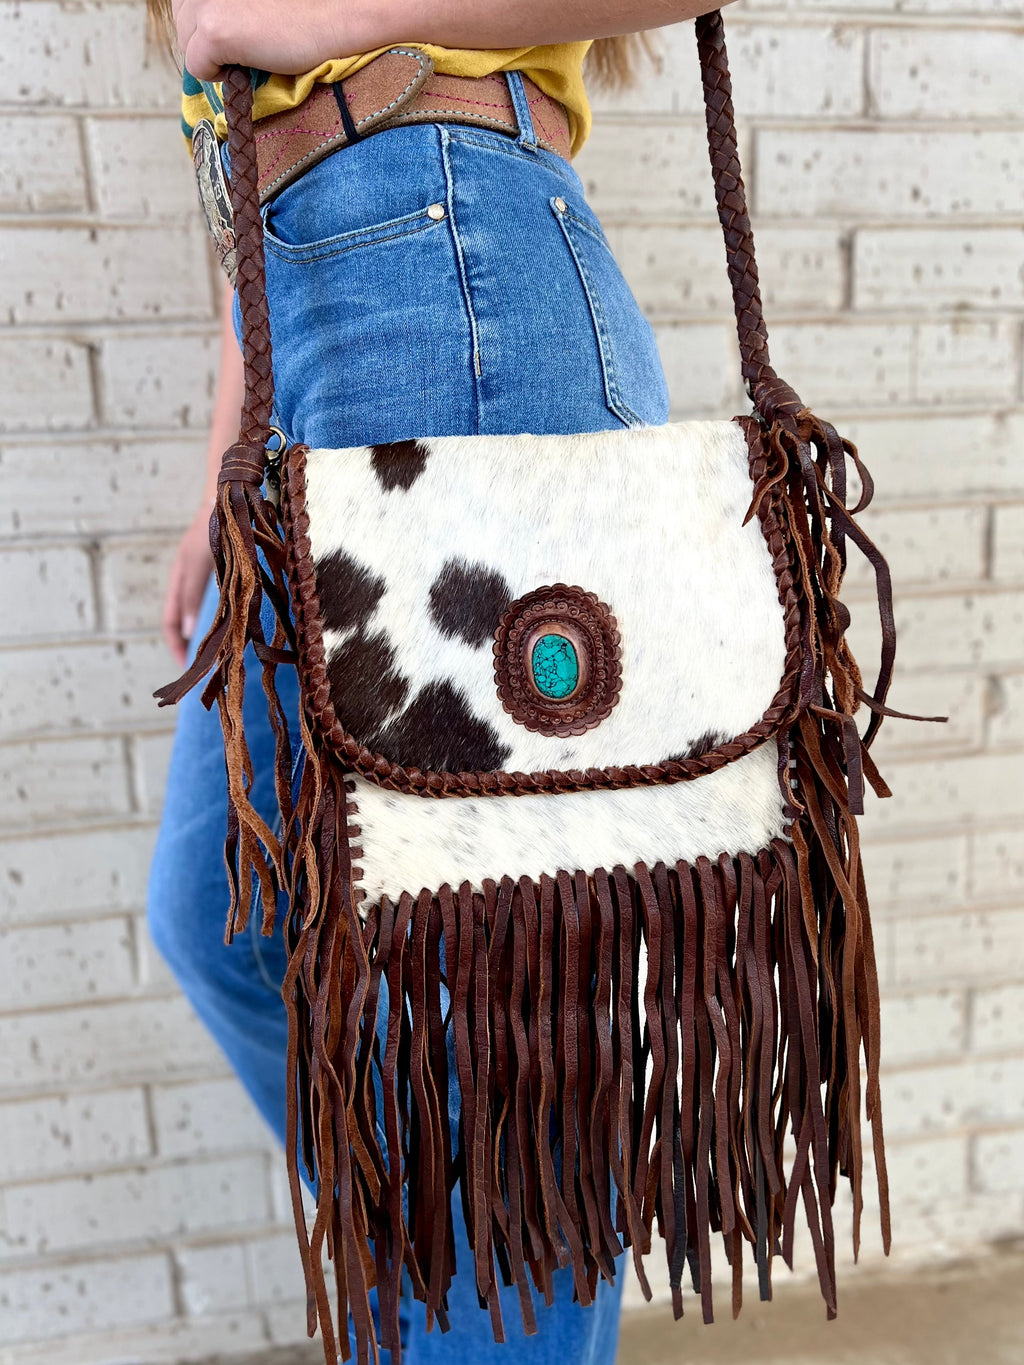 Take your style up a notch with the Turquoise Rock In The Herd Bag! This 10"X10" bag is made to impress with a 46" braided leather shoulder strap and 1.25" turquoise stone for a one-of-a-kind look. And snap front closure ensures your things stay secure. Show the herd what you're made of!